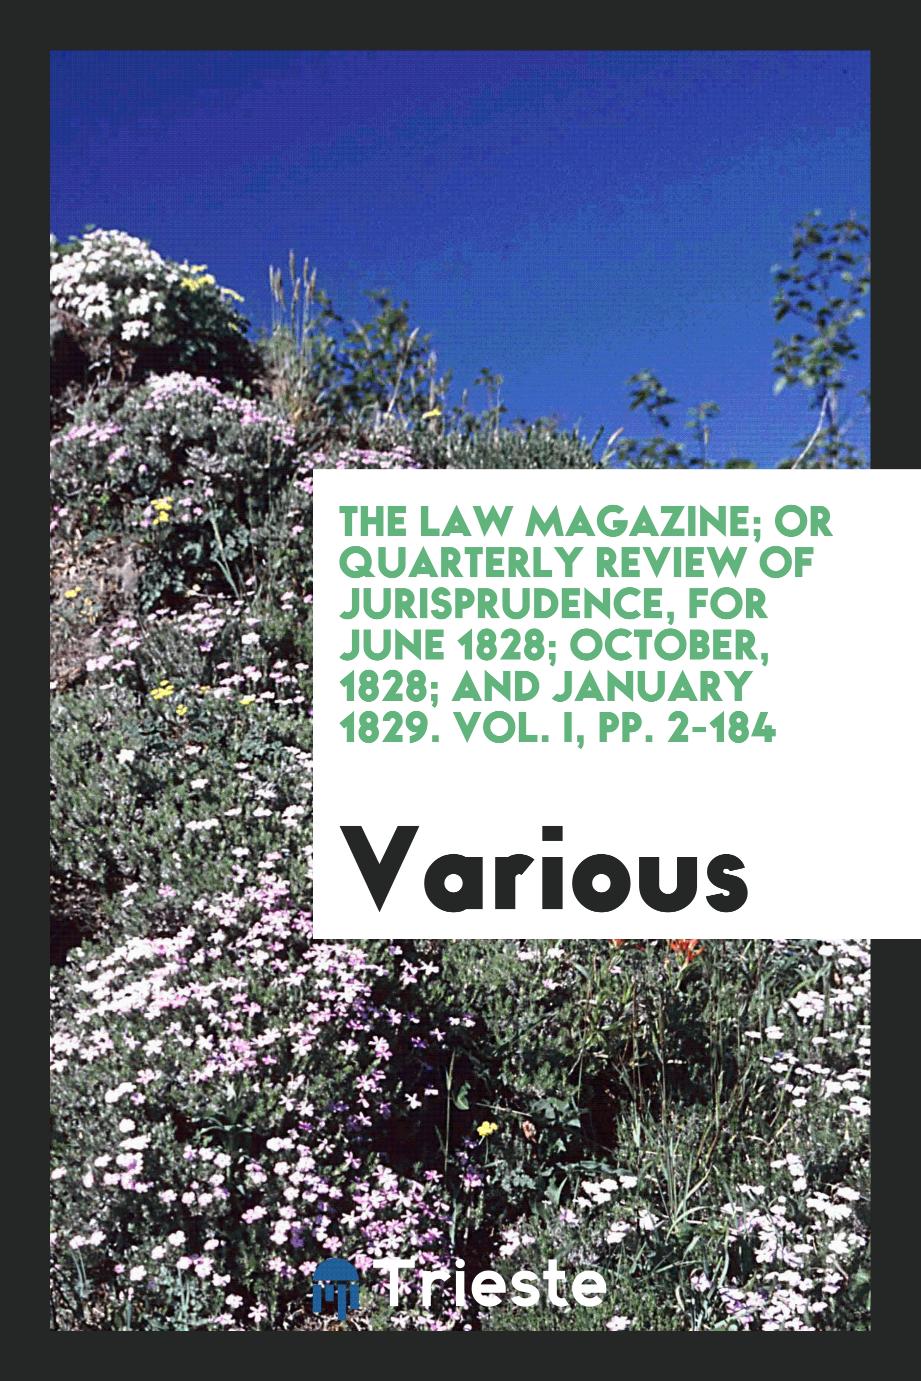 The Law Magazine; Or Quarterly Review of Jurisprudence, for June 1828; October, 1828; And January 1829. Vol. I, pp. 2-184